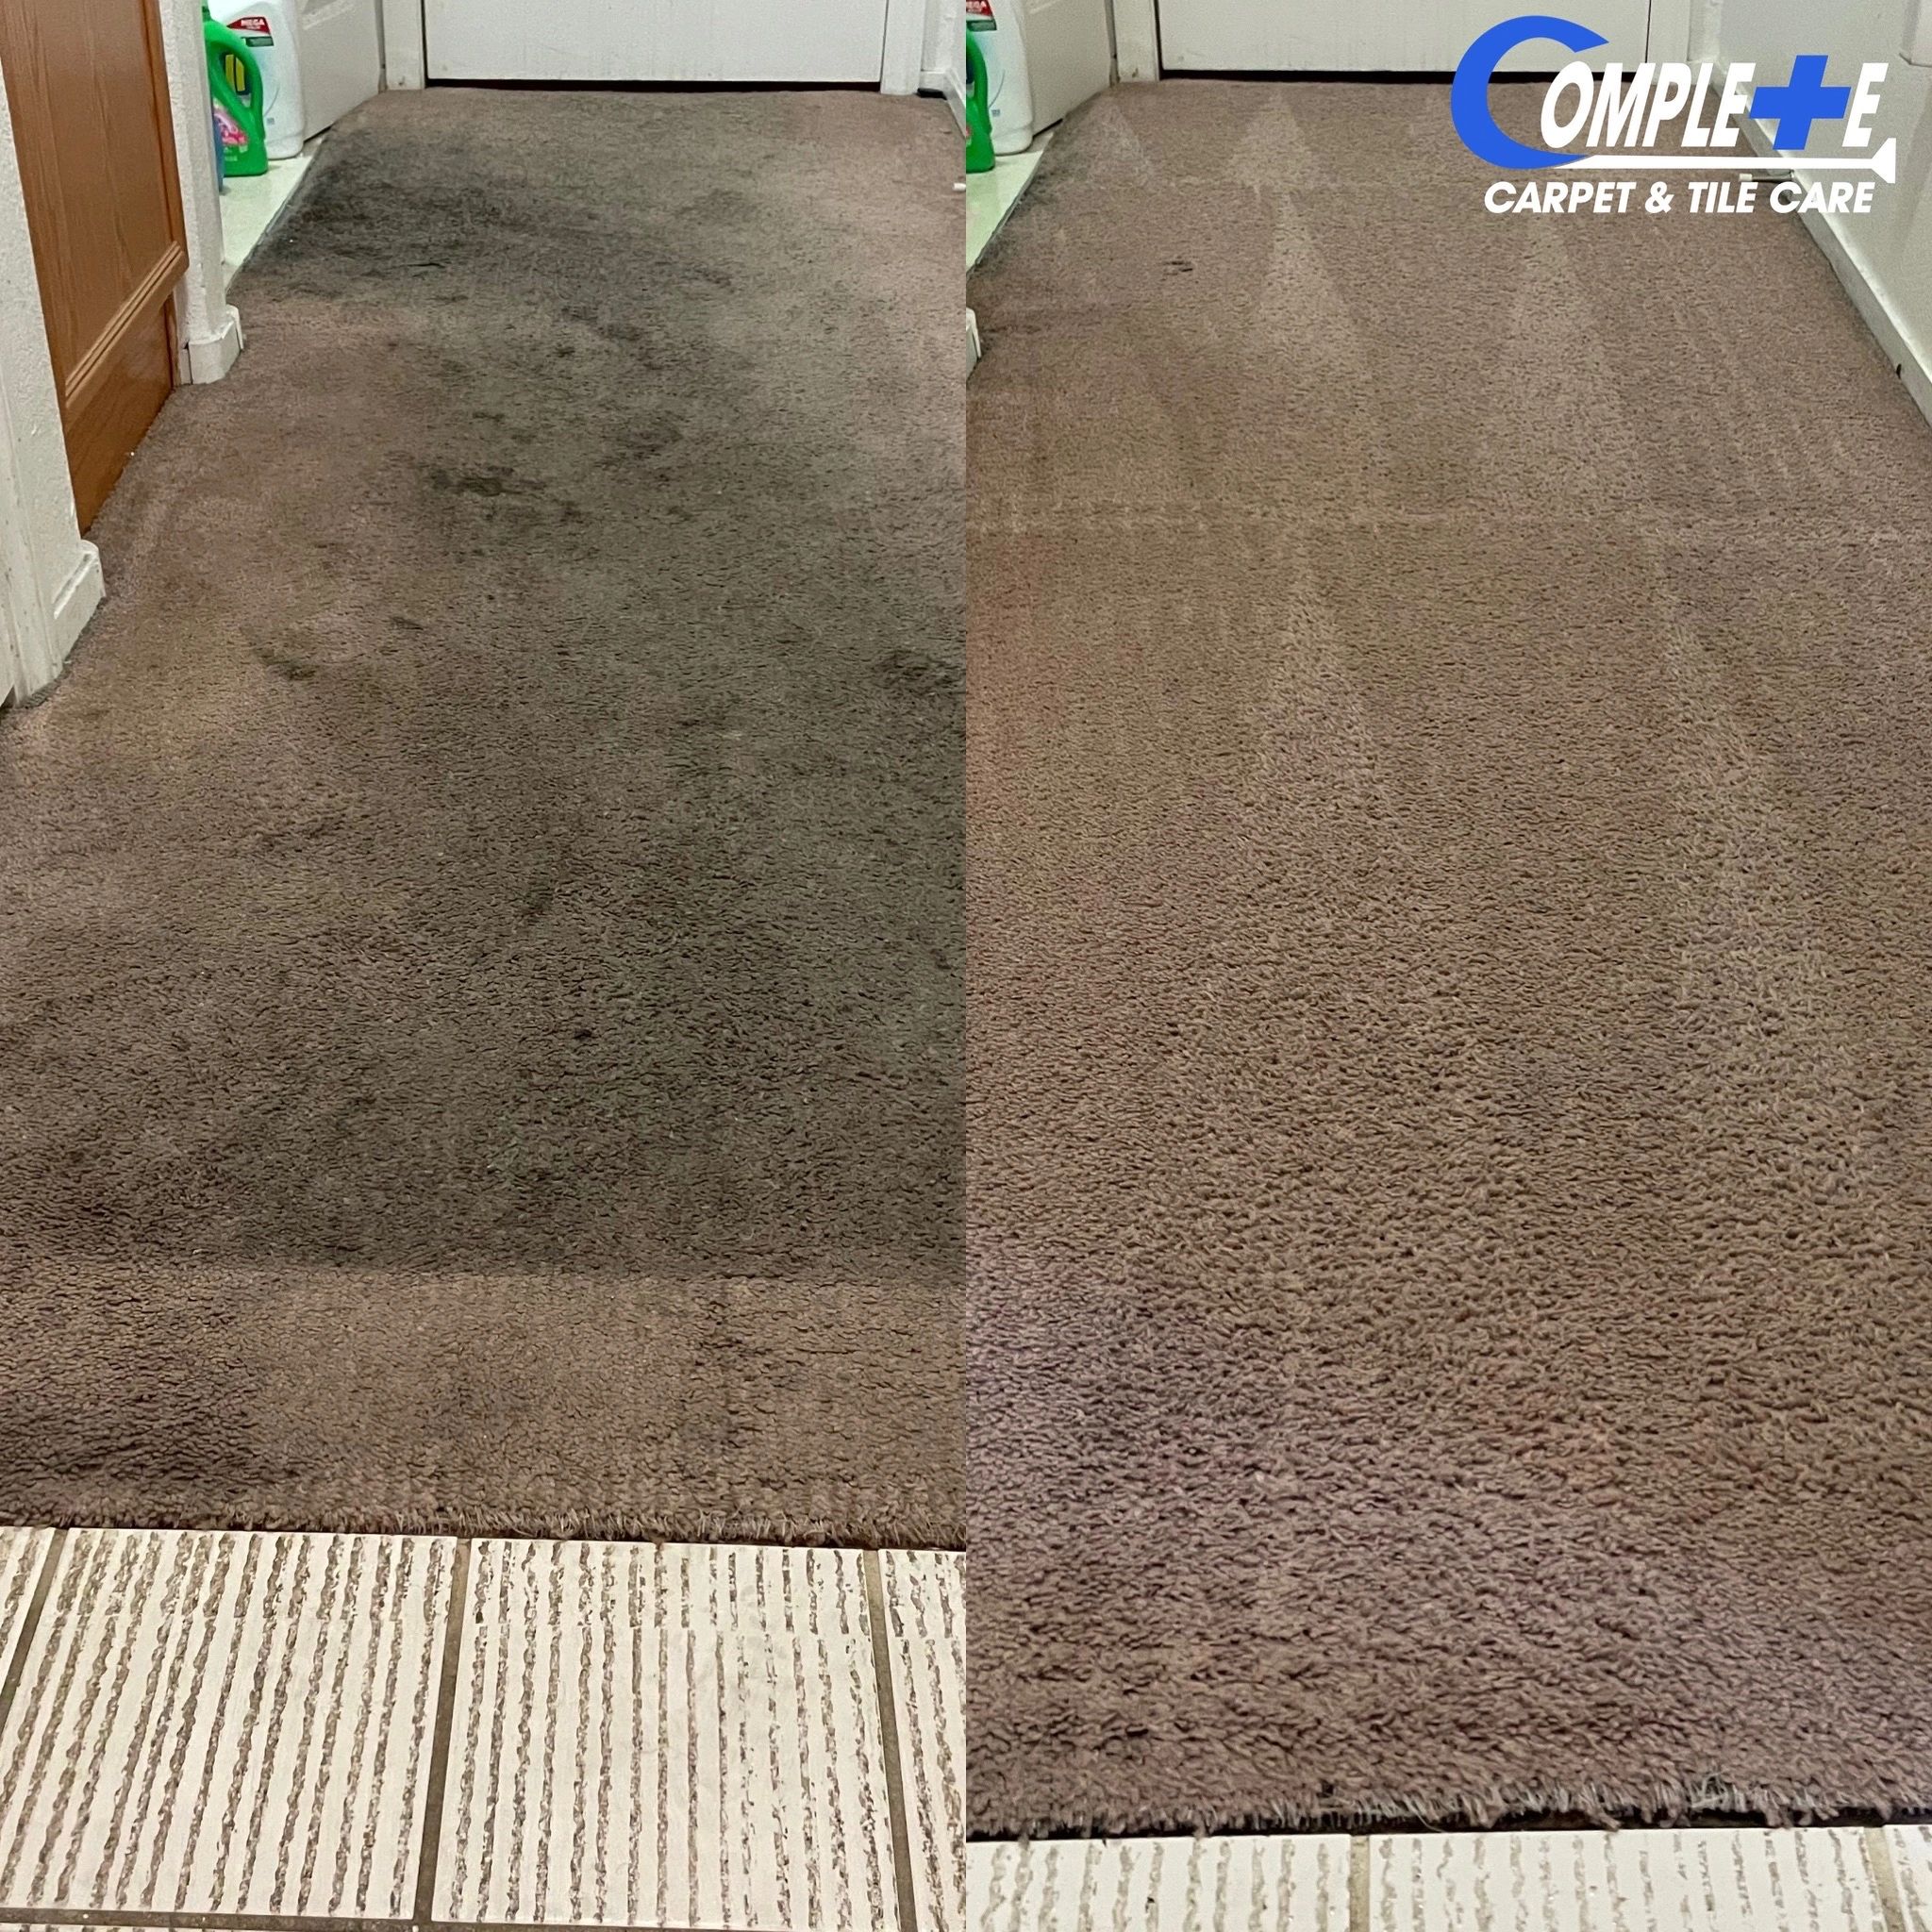 Before: A Dirty and Stained Carpet in an apartment complex in las vegas. 
After: Clean Carpets 